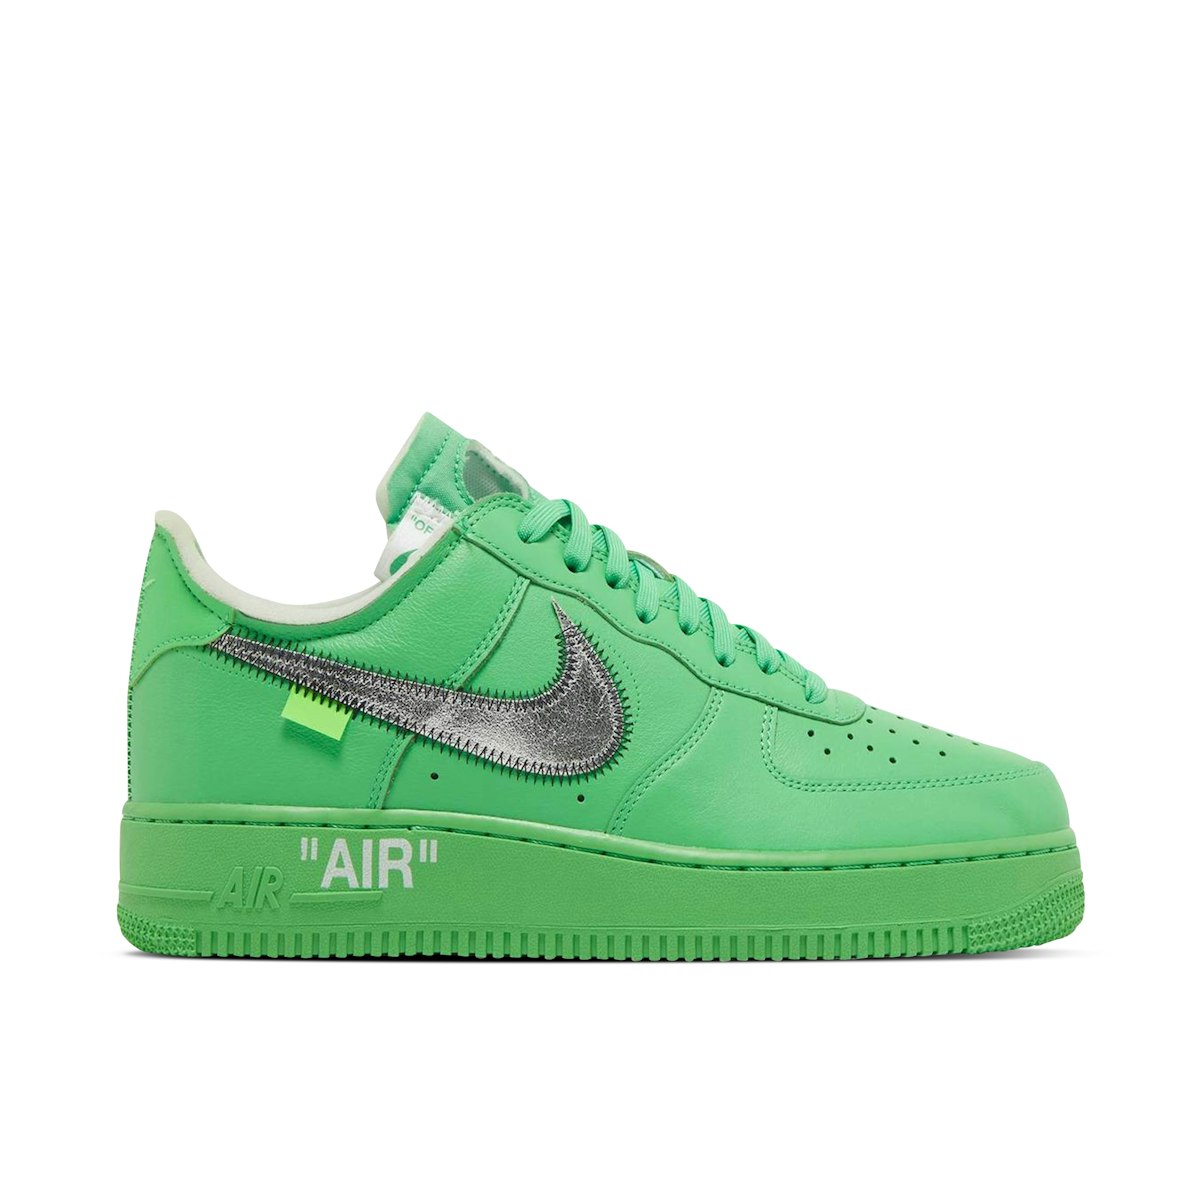 Nike x Off-White Air Force 1 Low Light Green Spark